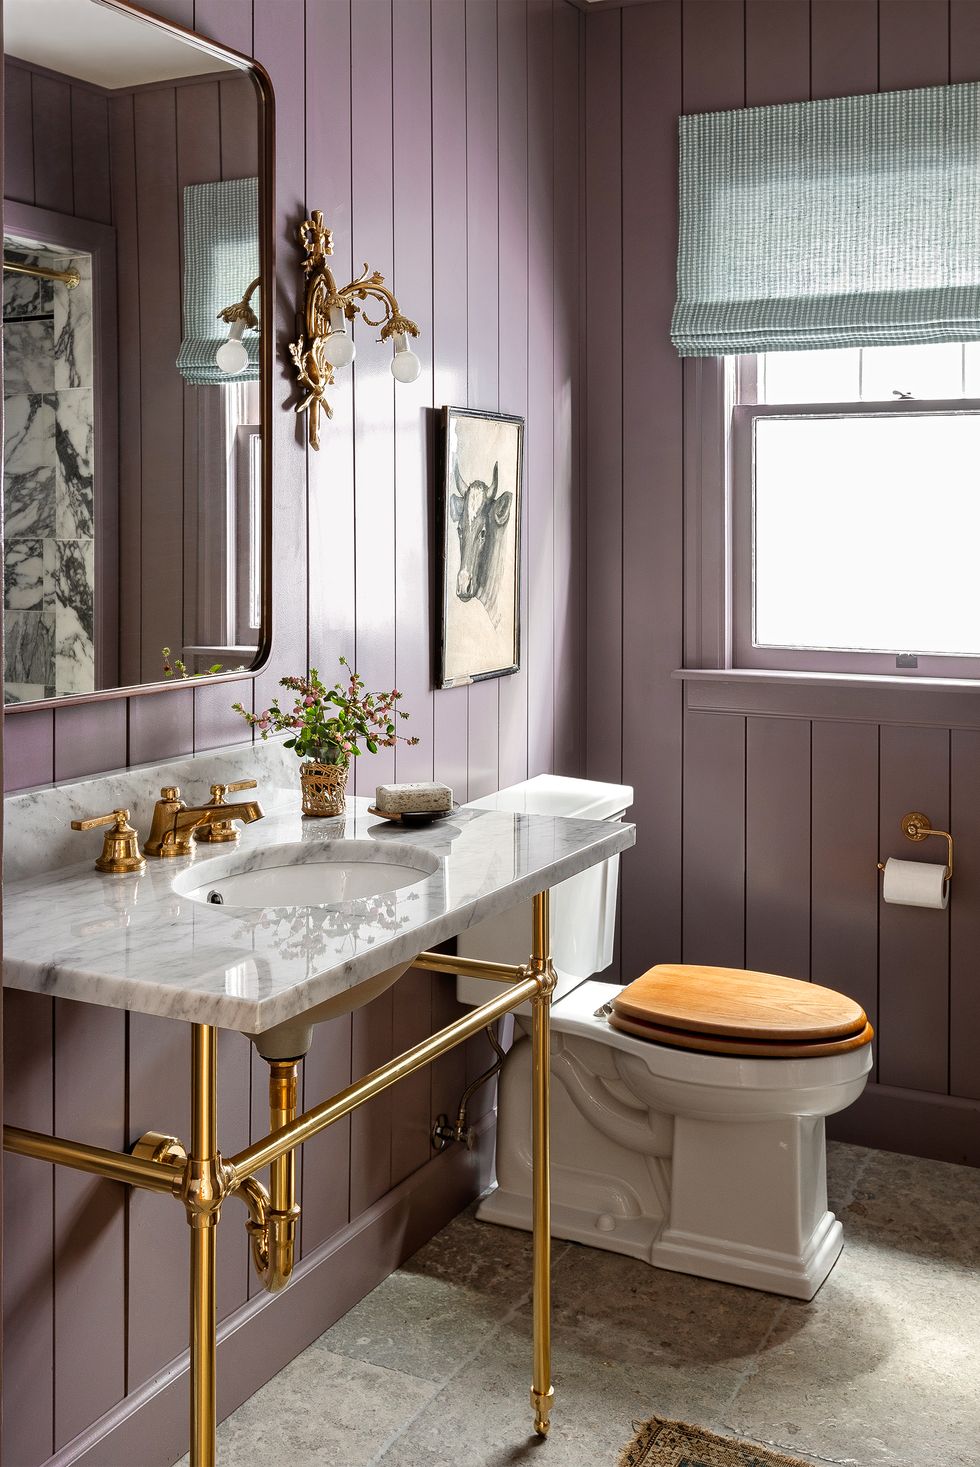 bathroom paint colors, small bathroom in a mauve paint color with gold embellishments